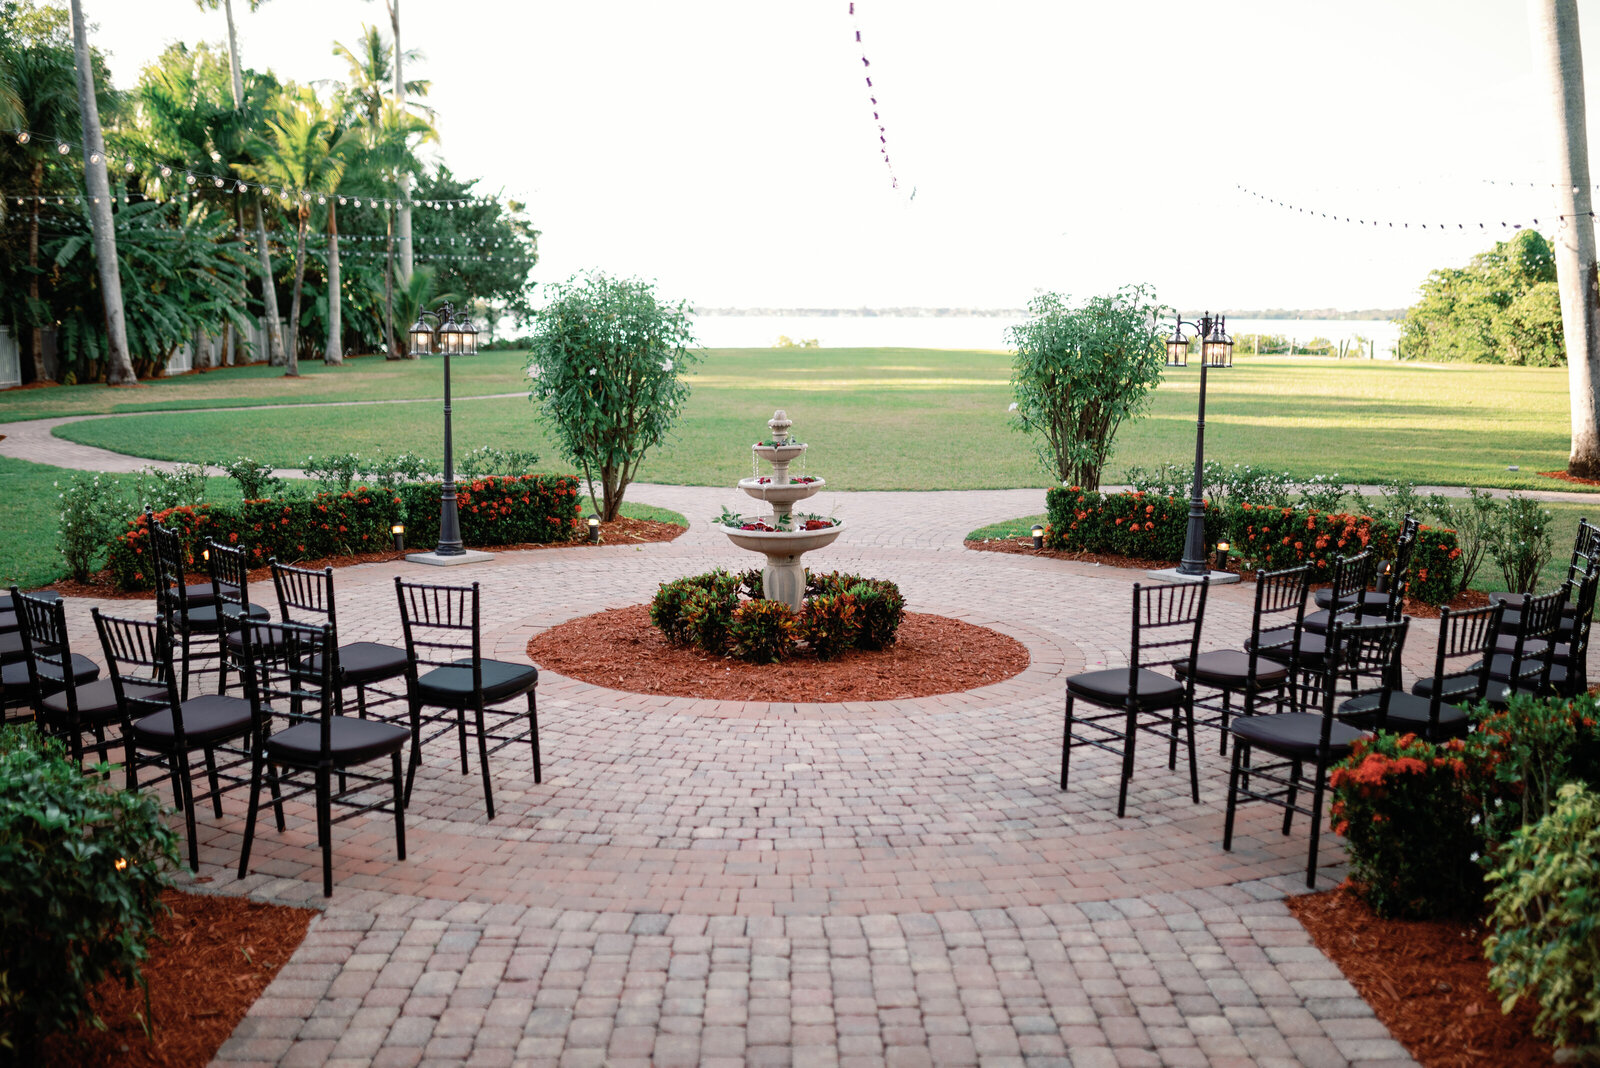 Wedding ceremony site set up in a semi-circle around a small fountain. Black chairs sitting on brick paver stones